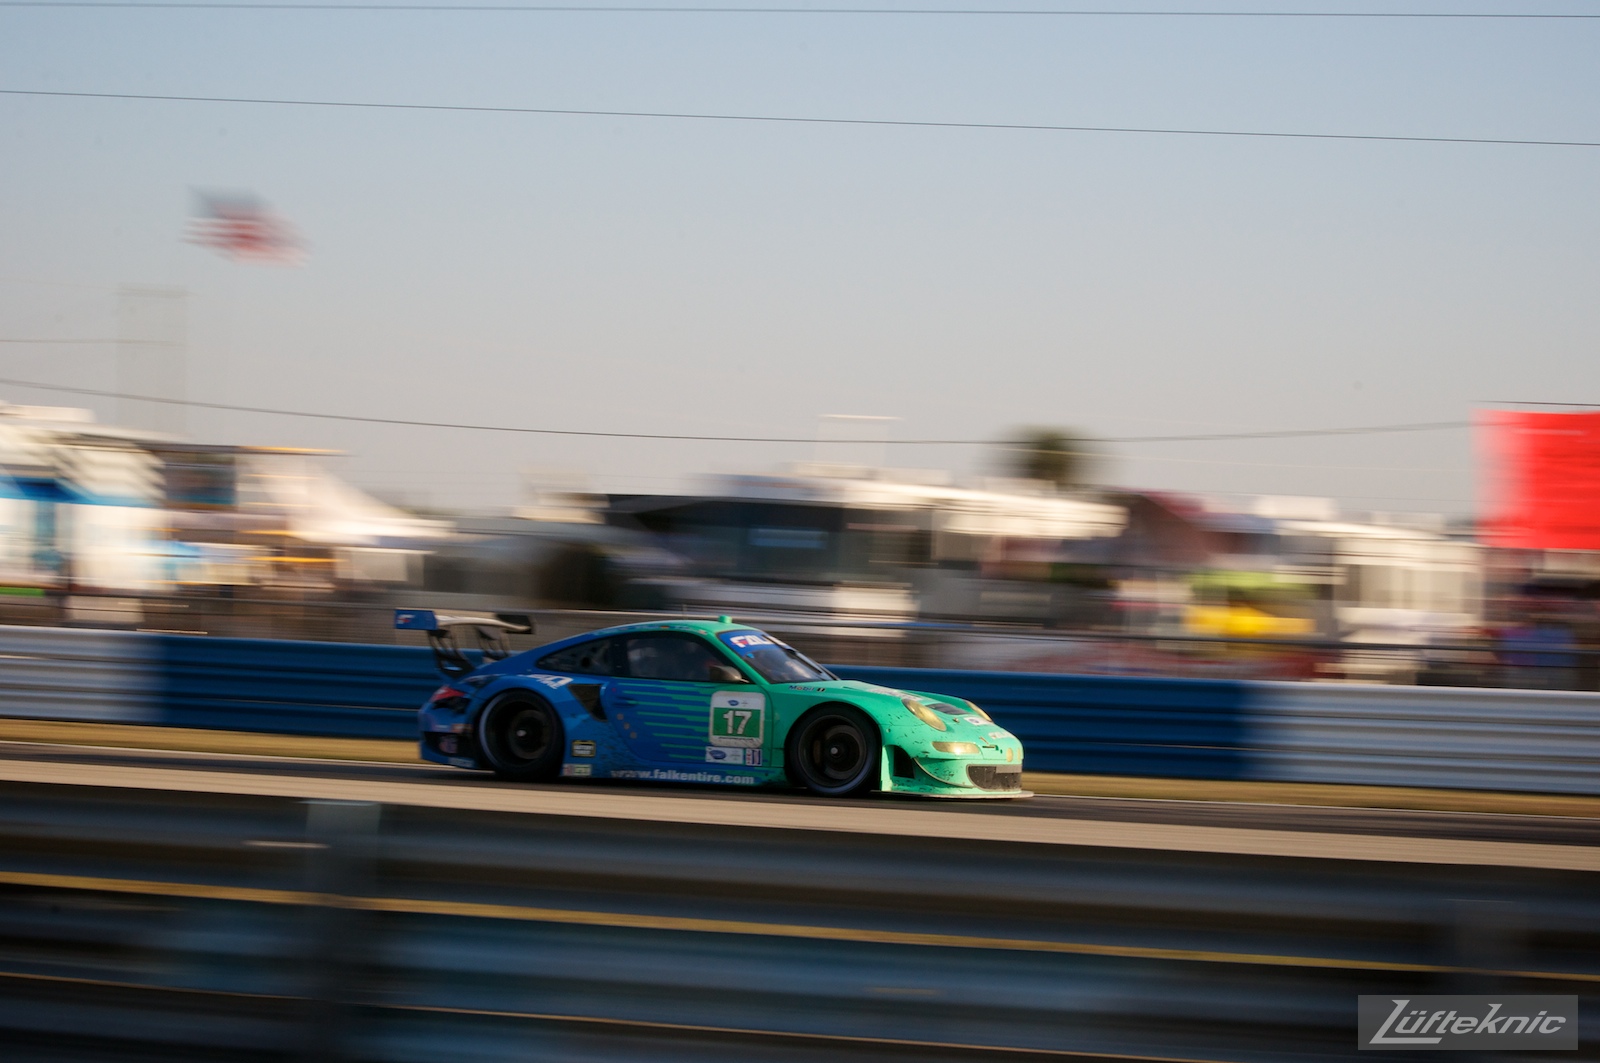 The iconic teal and blue Falken Tire Porsche 911 RSR at Sebring.